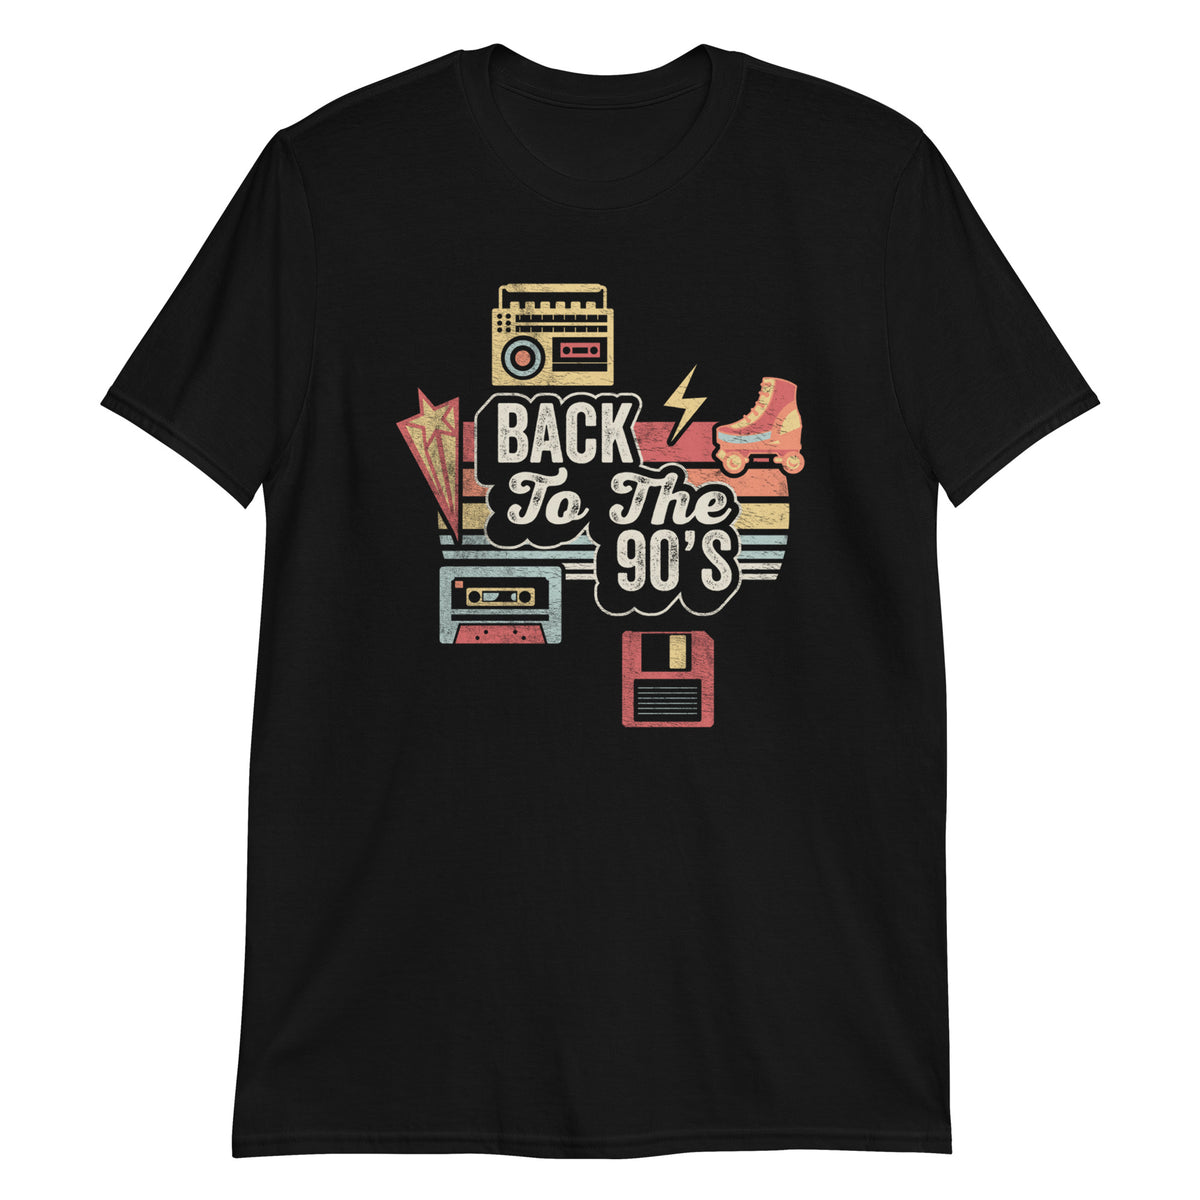 Back to The 90s T-Shirt